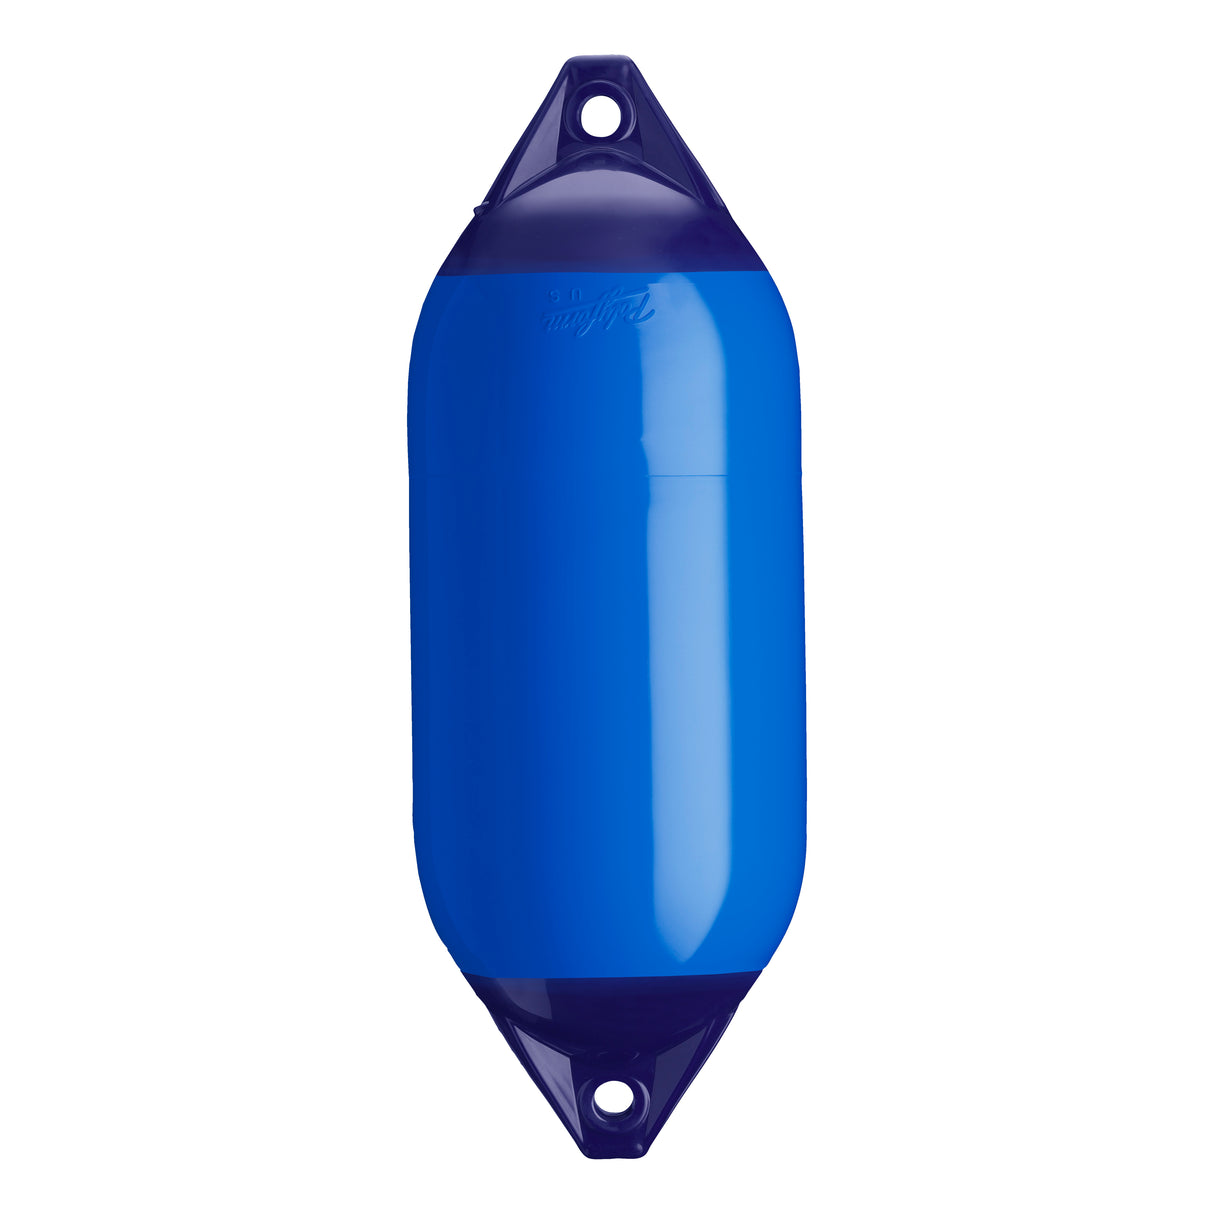 Blue boat fender with Navy-Top, Polyform F-5 